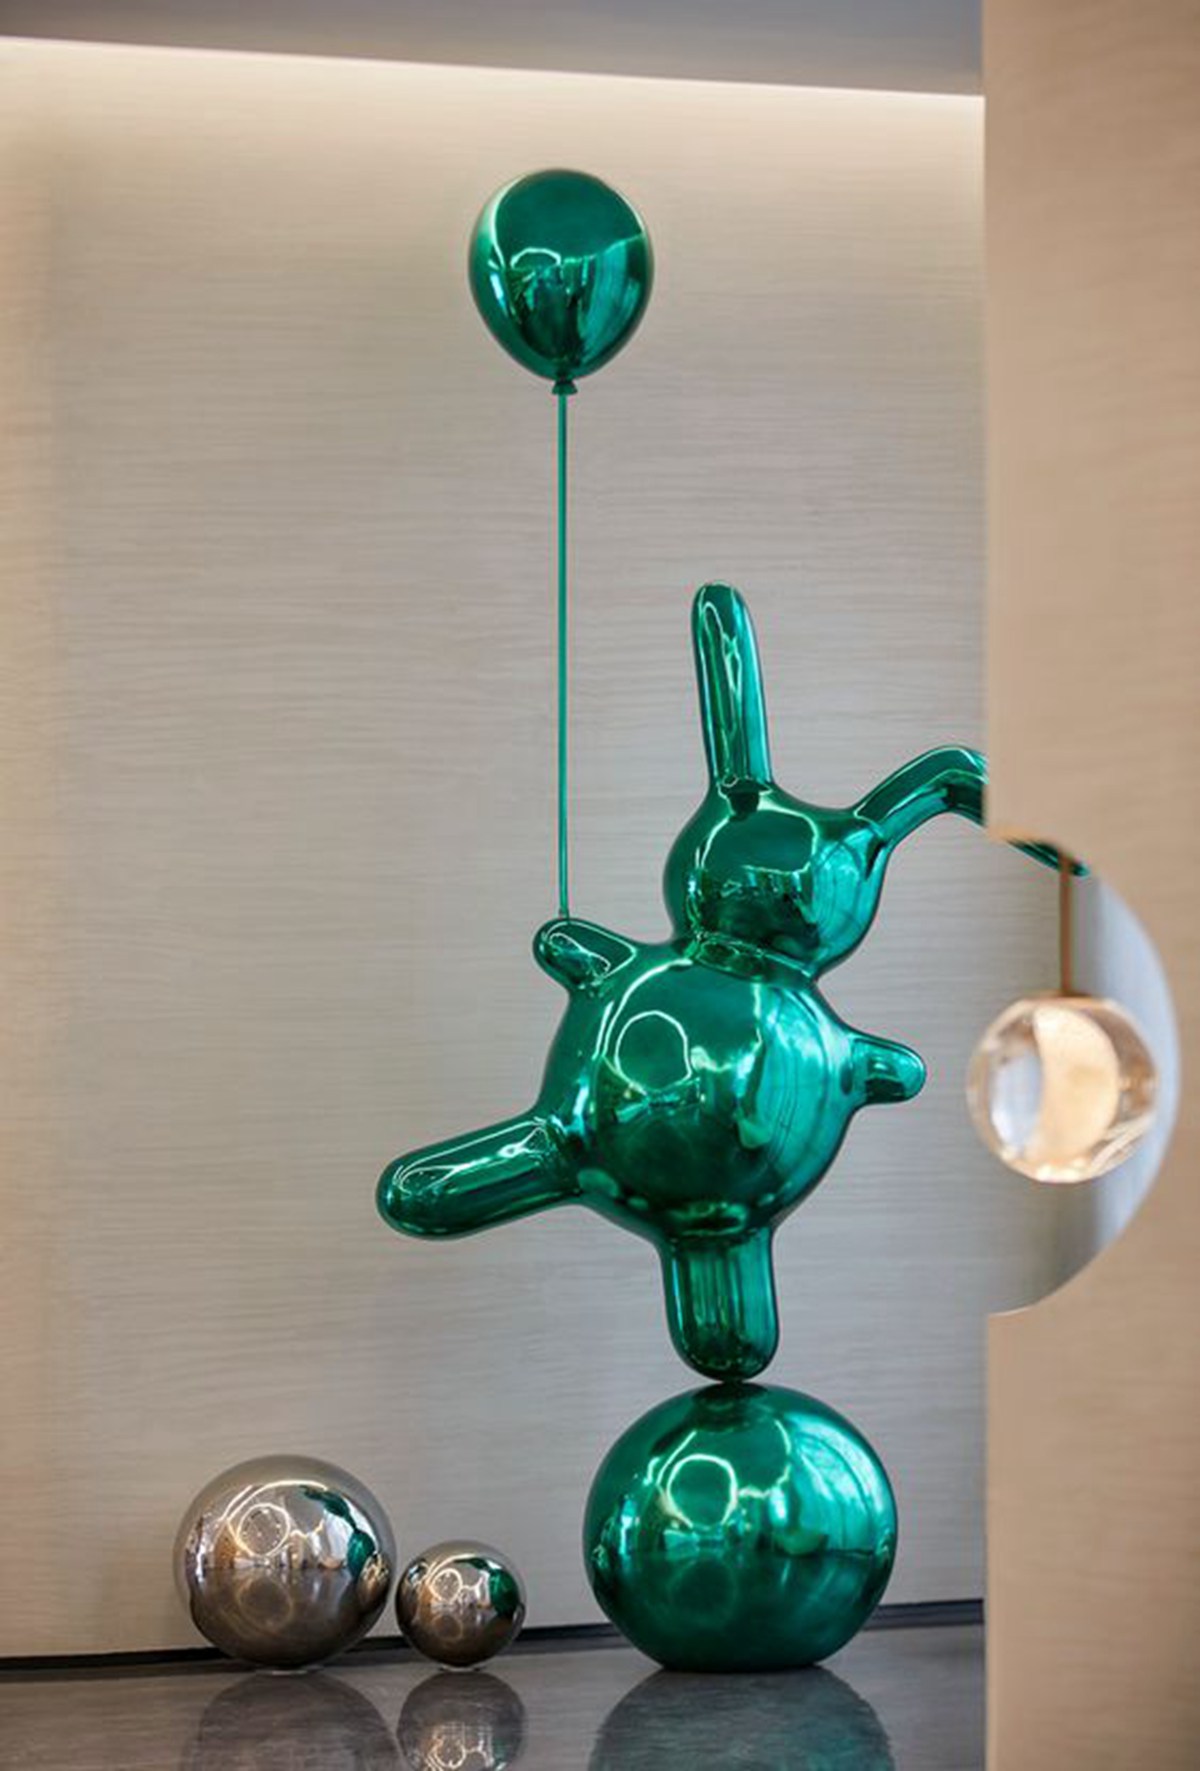 stainless steel balloon sculpture for sale (4)